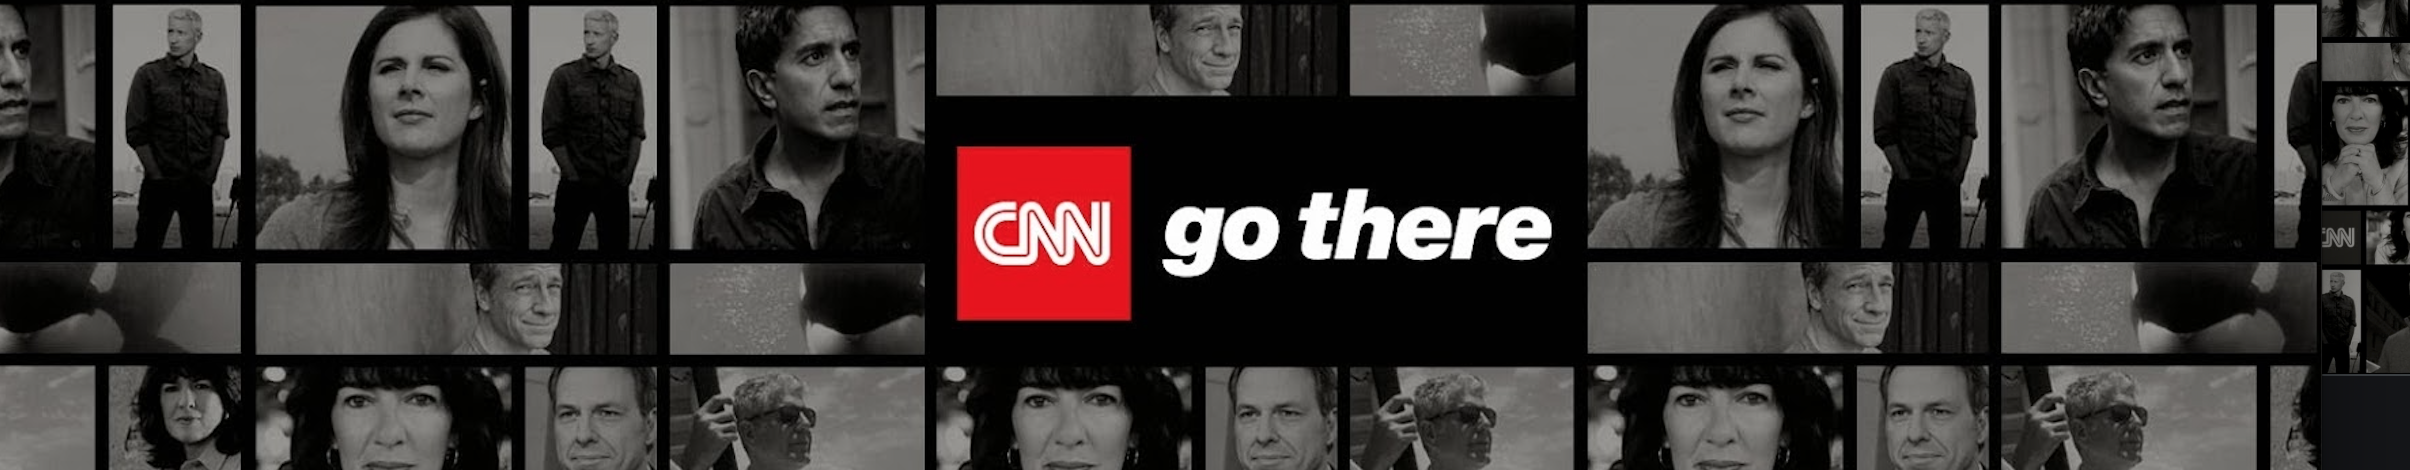 CNN Go There Banner